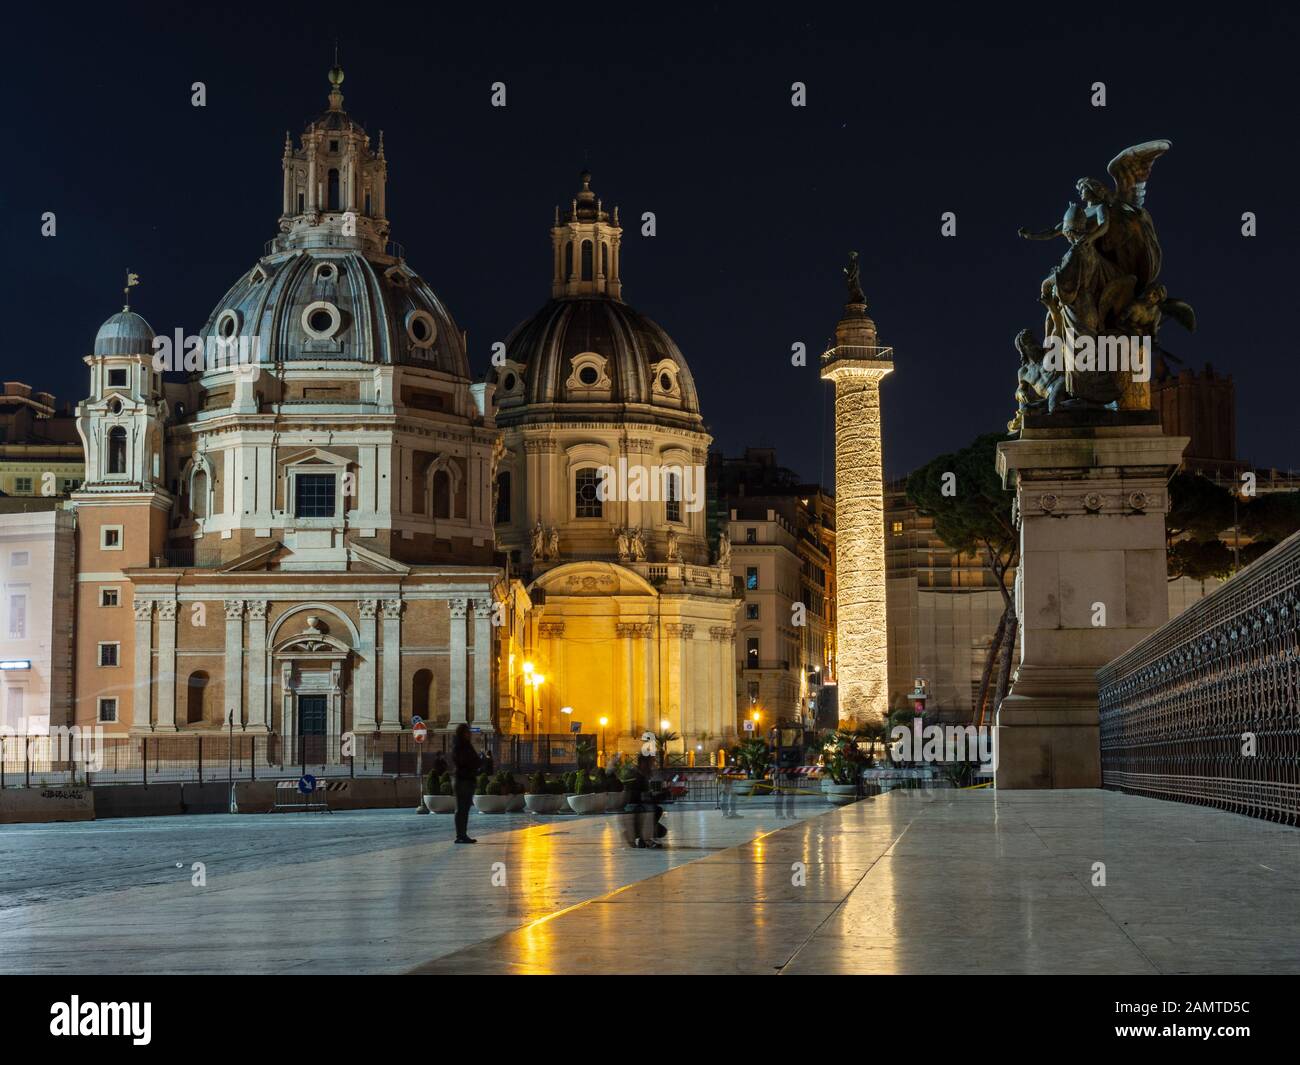 Rome, Italy - March 25, 2018: Tourists stop for photos of the ancient and Renaissance architecture of Piazza Venezia in Rome at night. Stock Photo